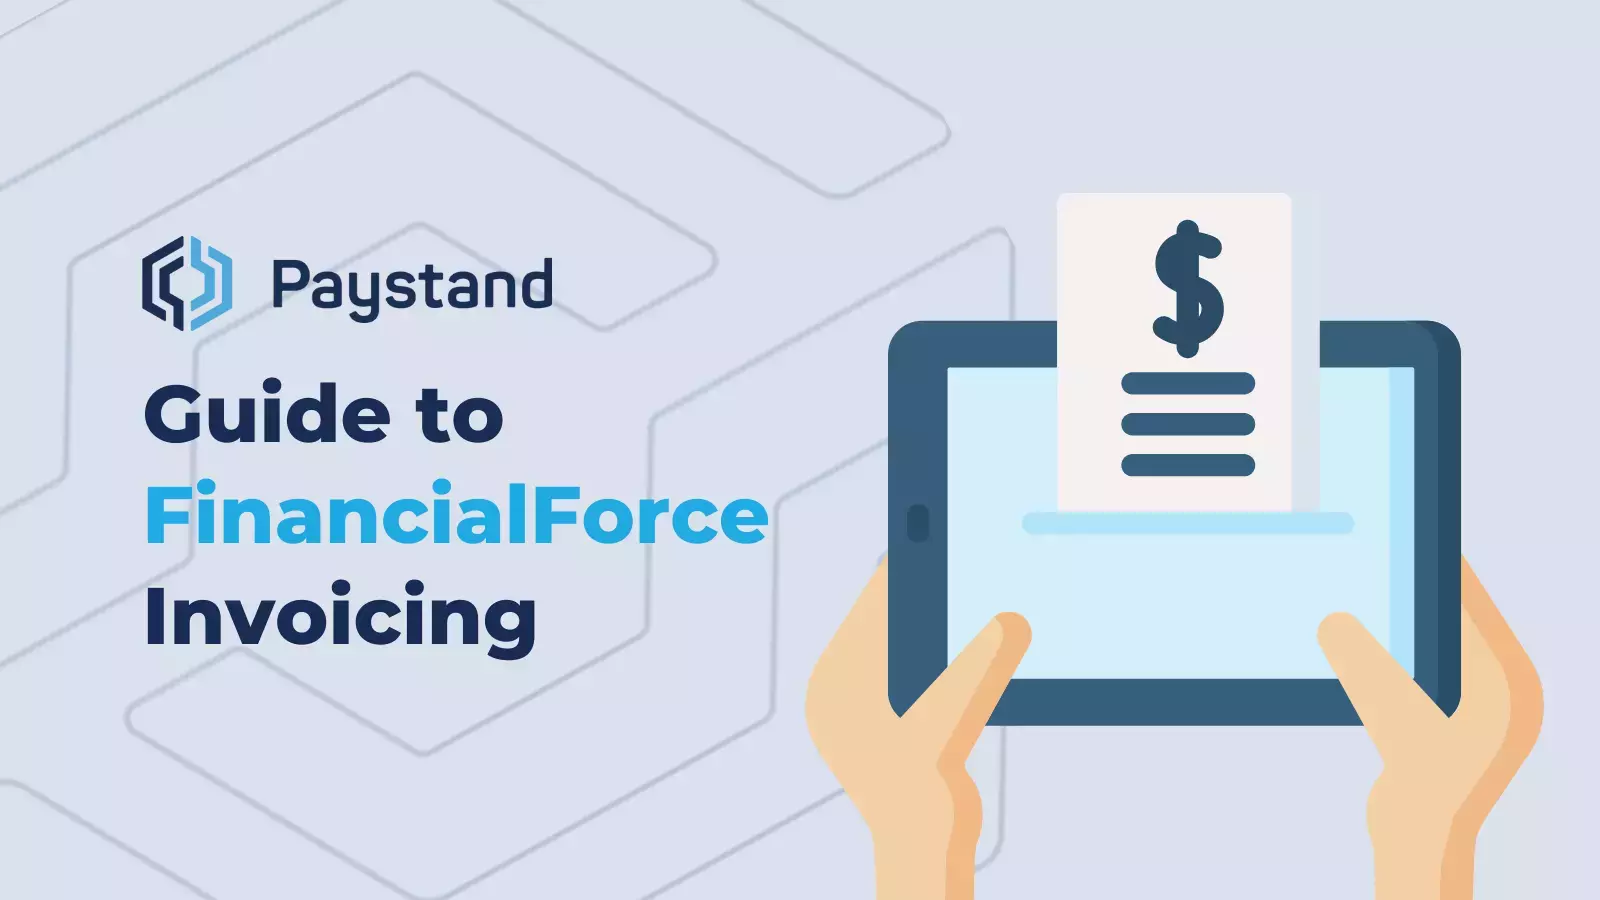 Guide to FinancialForce Invoicing